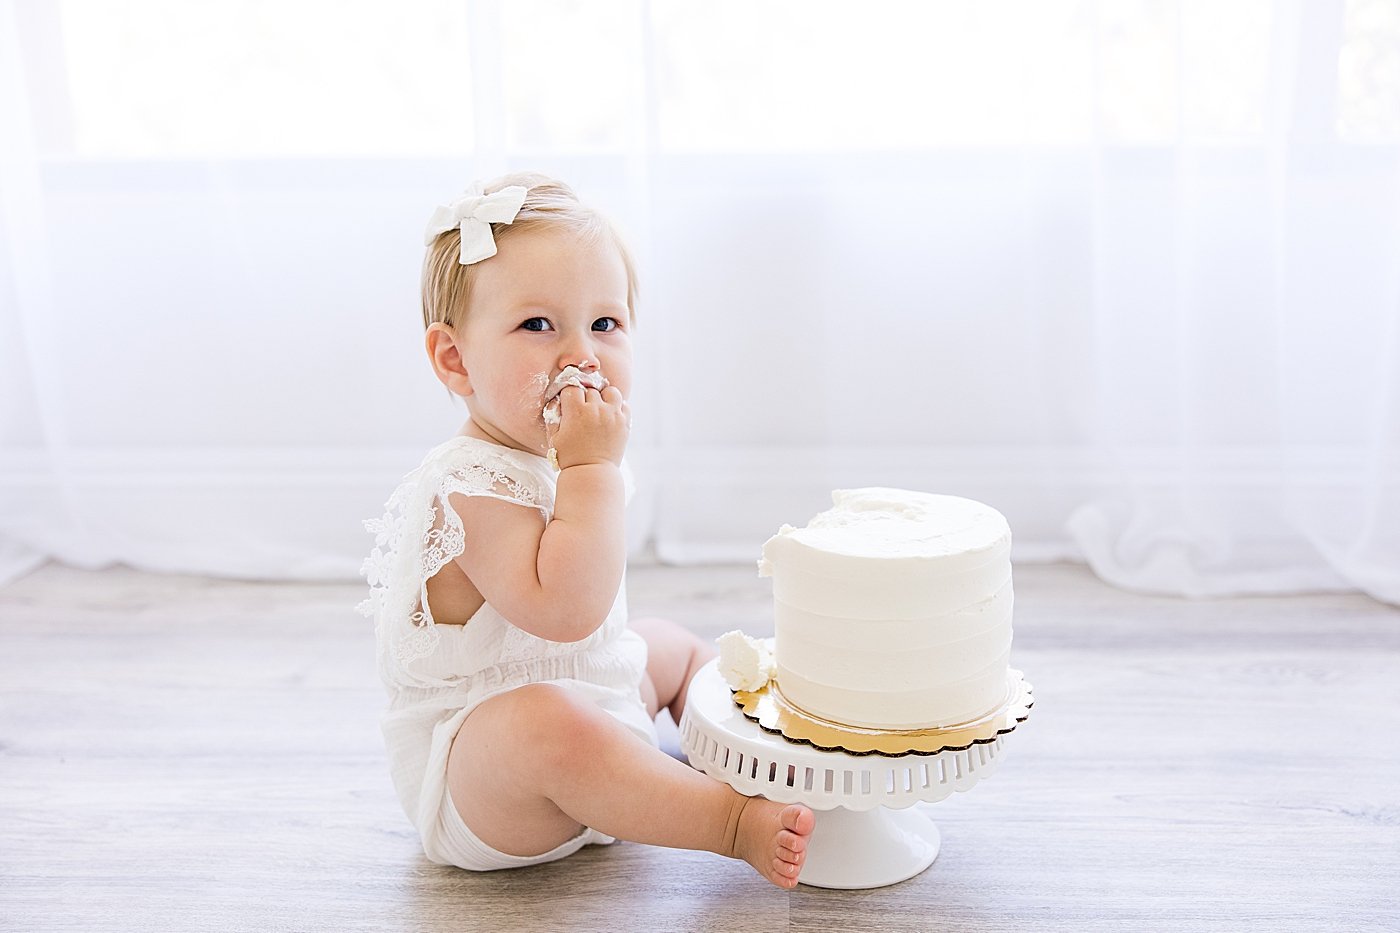 One Year Cake Smash Session In Studio | Ambre Williams Photography